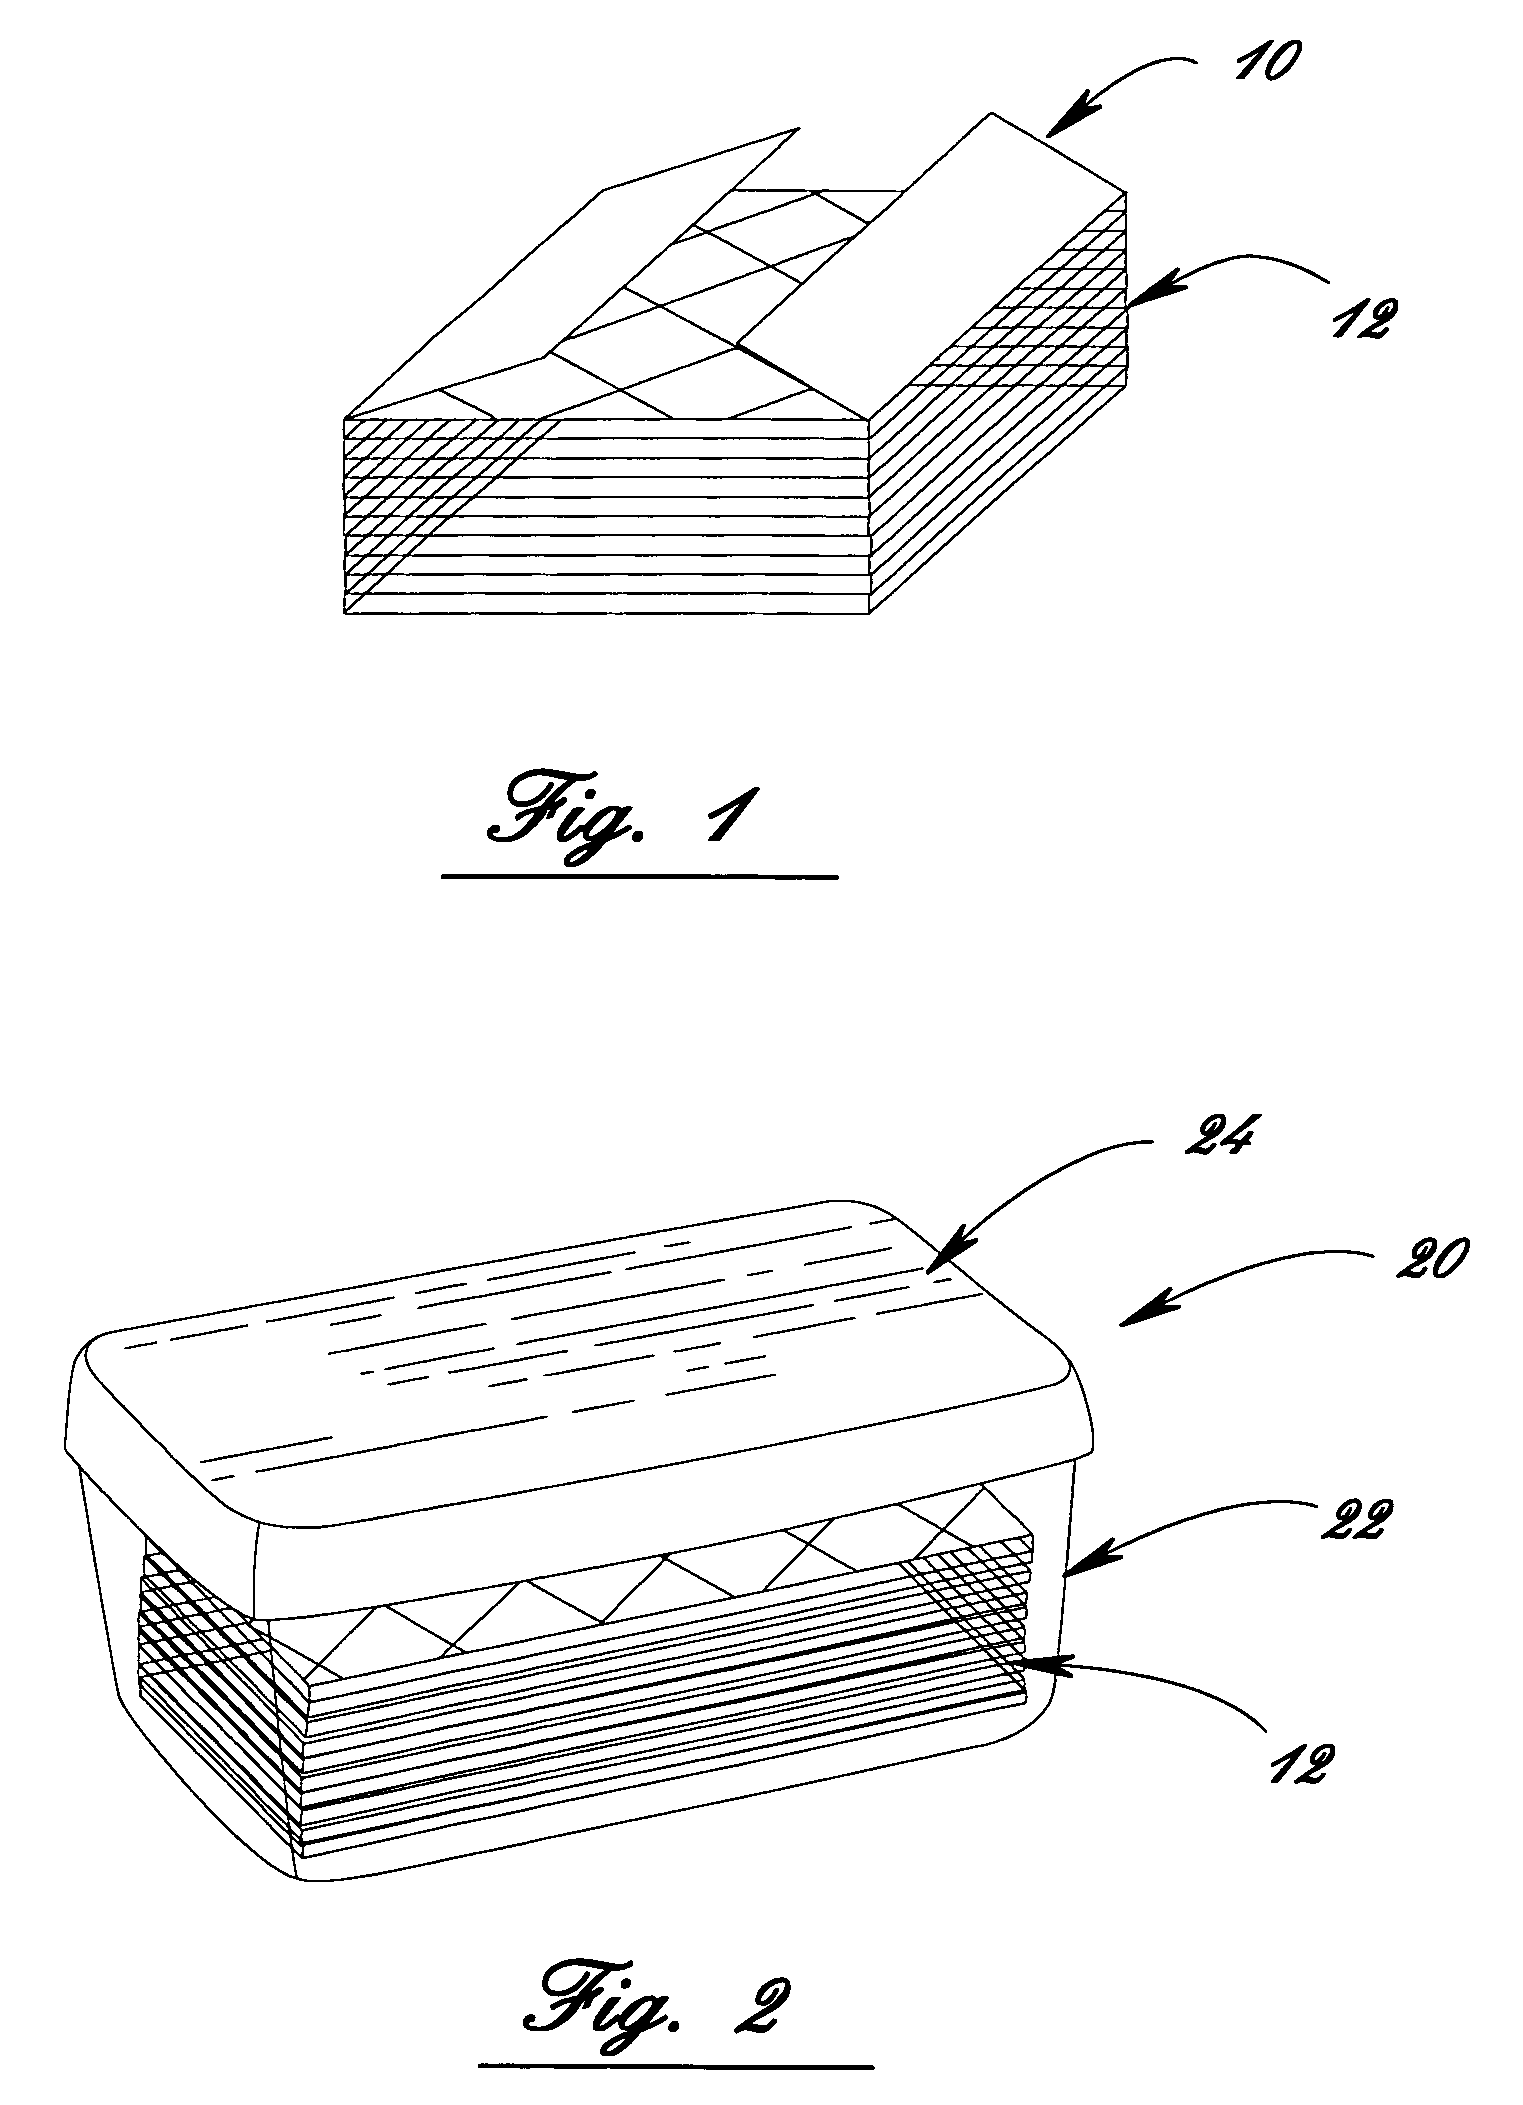 Sheet substrates impregnated with aromatic releasing compositions and a method of delivery of aromatic releasing compositions